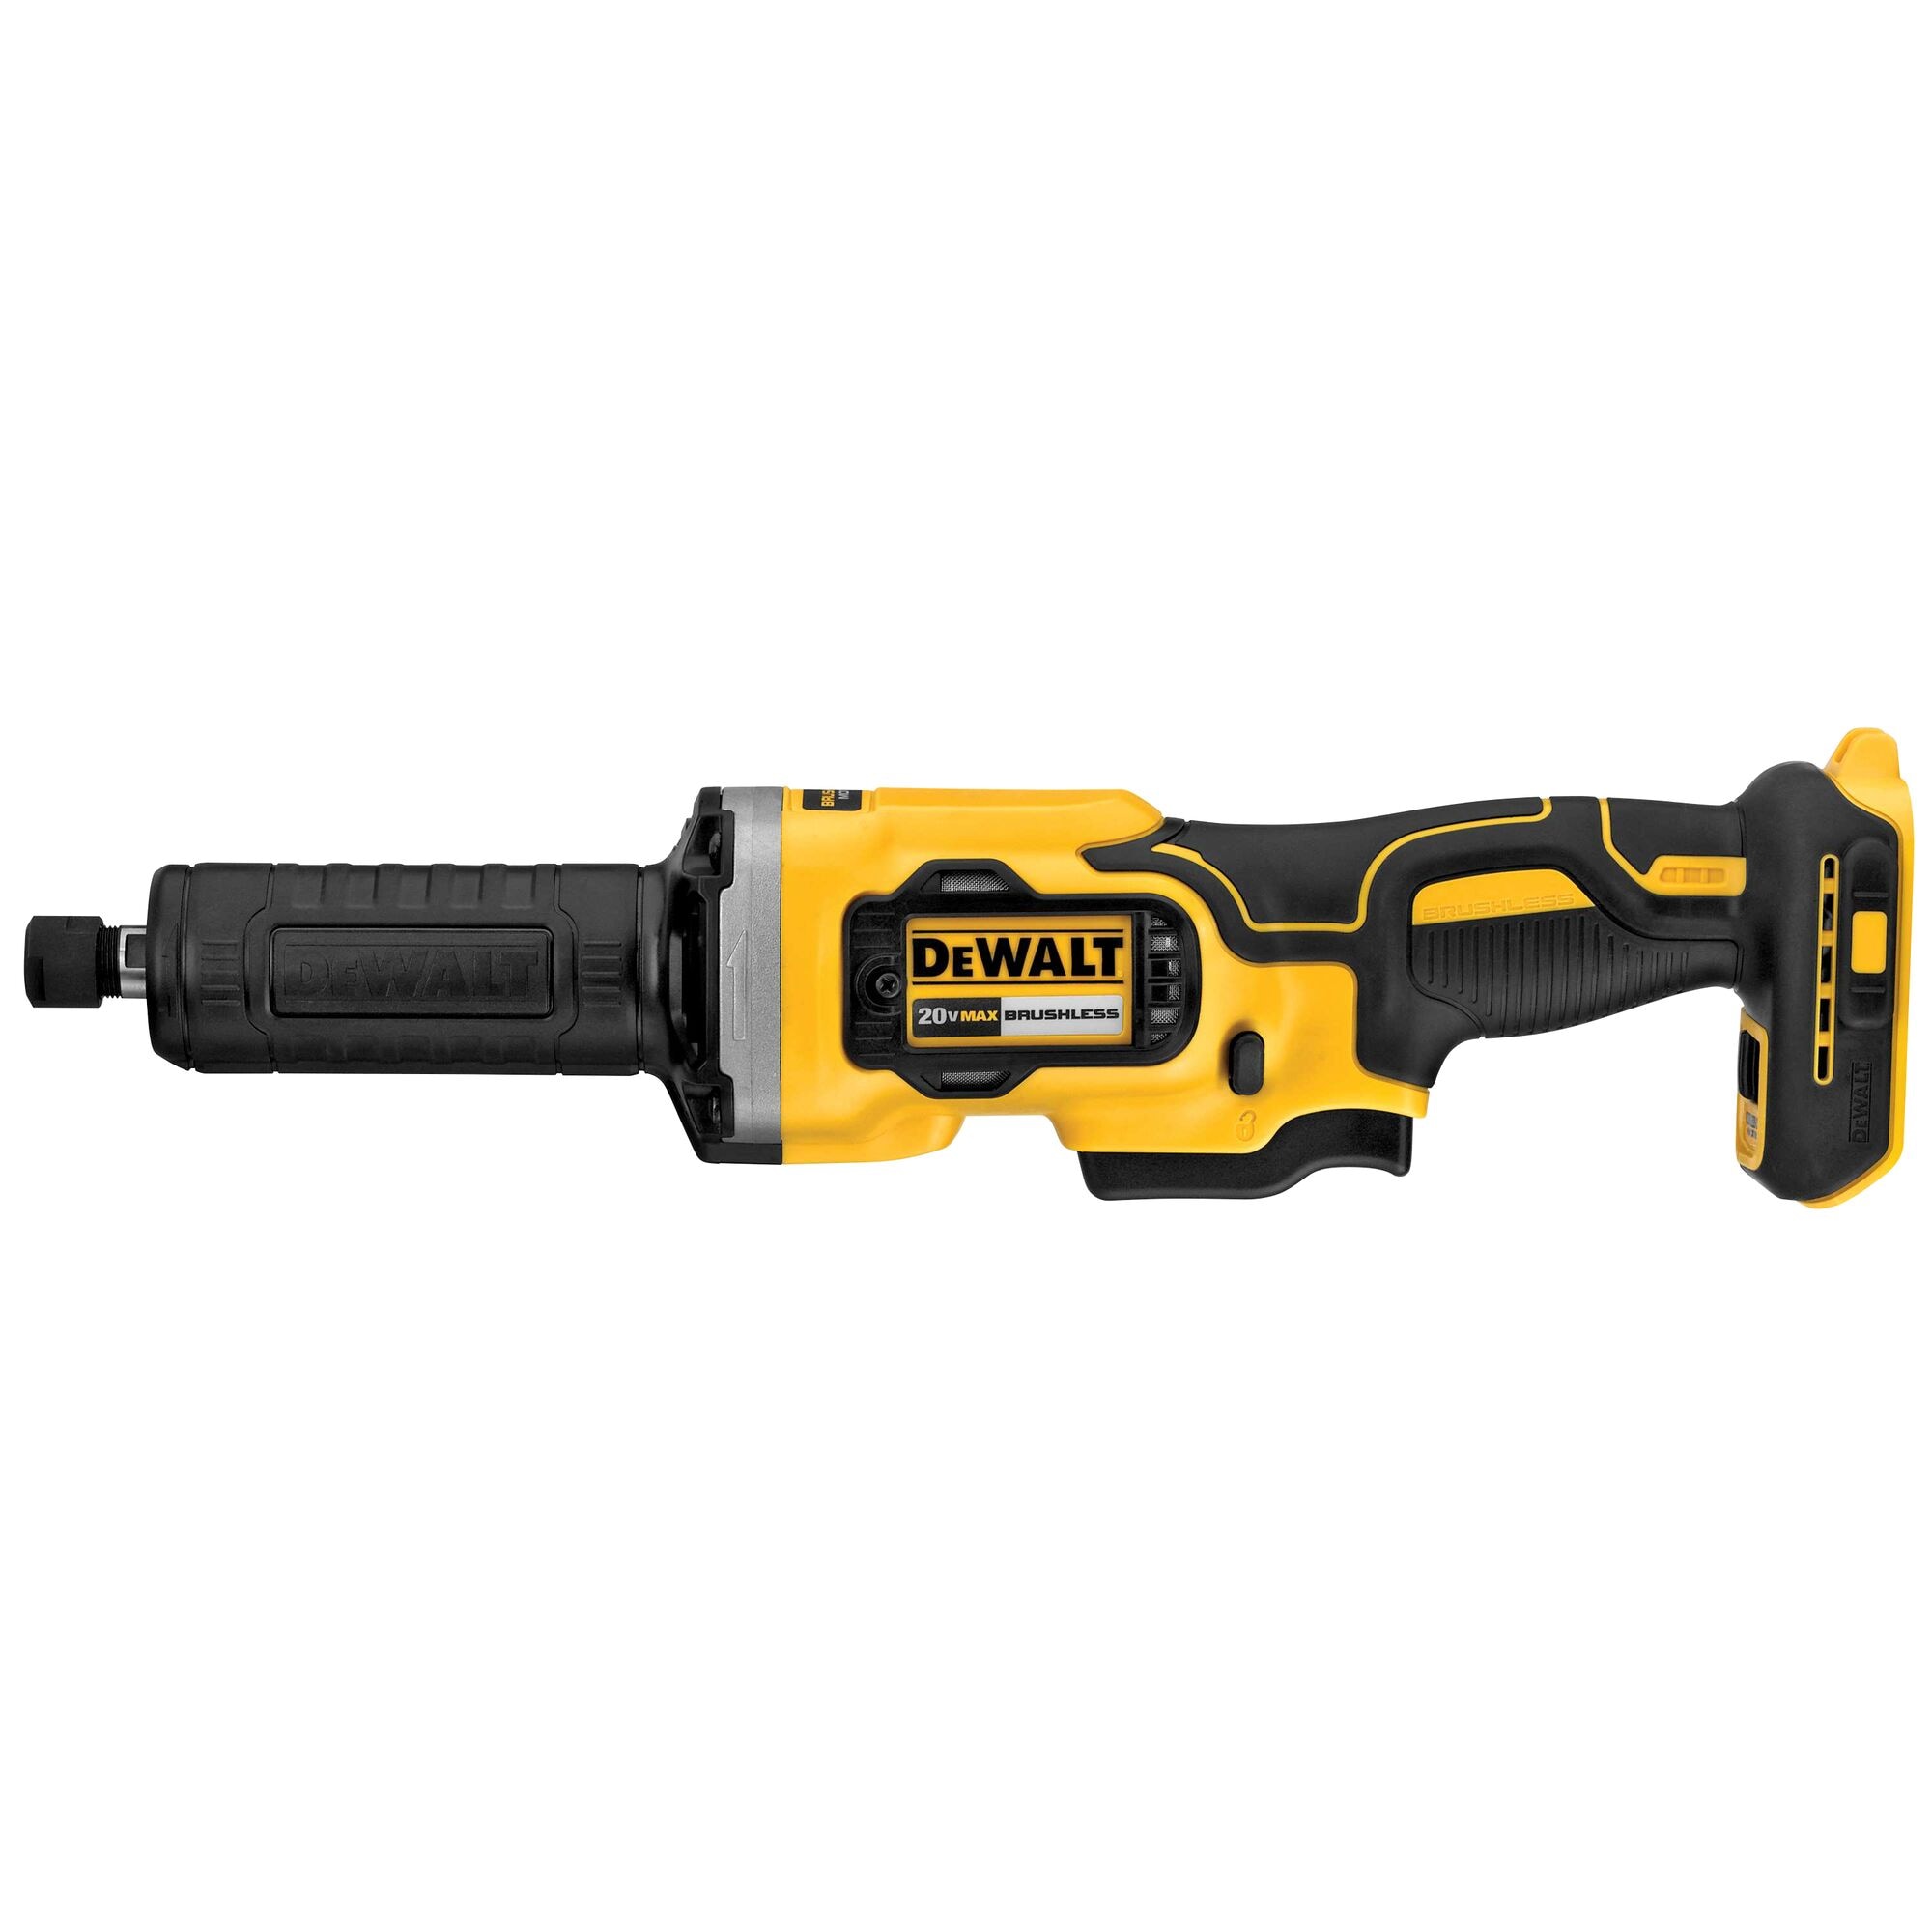 Capri Tools 1/4 in. 1 HP Air Straight Die Grinder, 5.5 in. Extra Long Neck  - The Contractor Shop